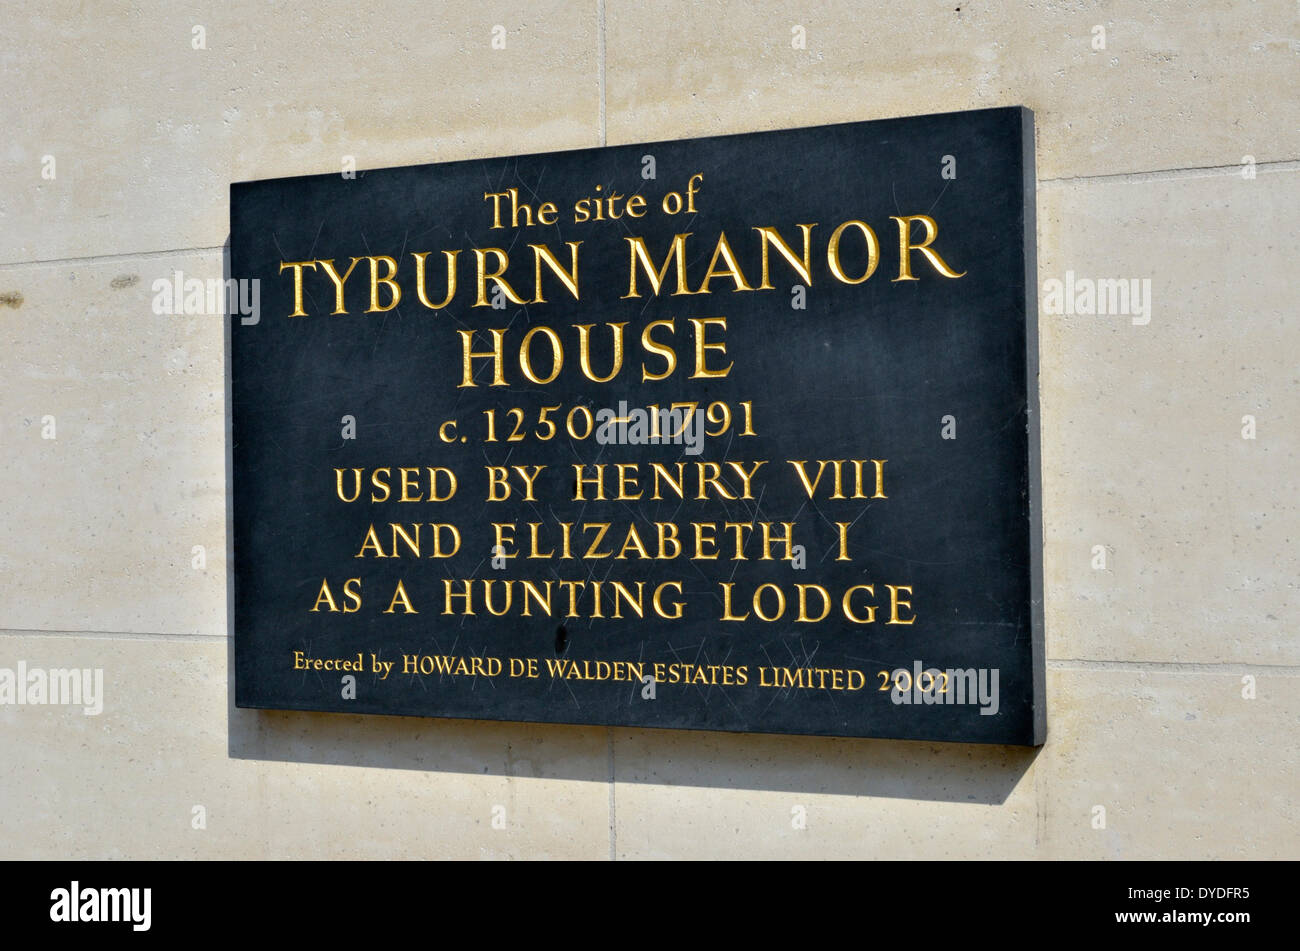 Plaque marking the site of Tyburn Manor House in Marylebone High Street. Stock Photo